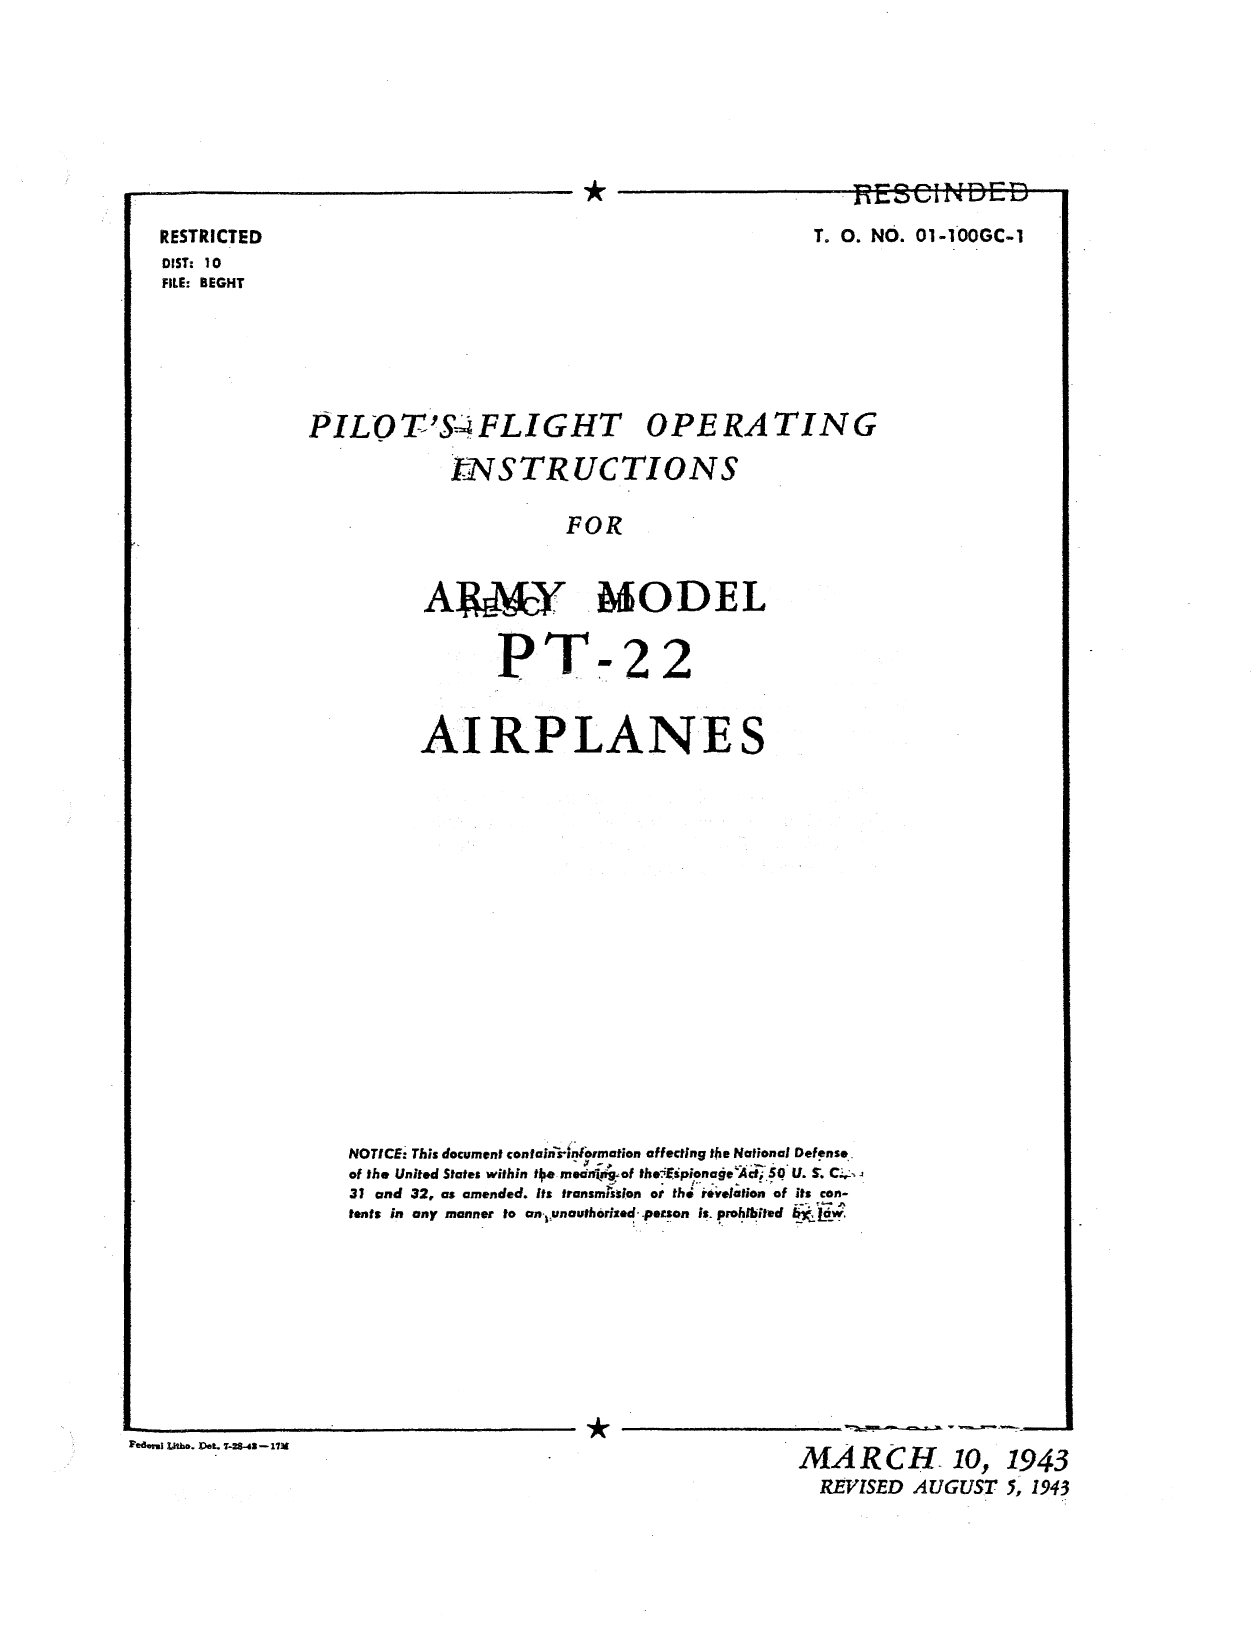 Sample page 1 from AirCorps Library document: Pilot's Flight Operating Instructions - PT-22